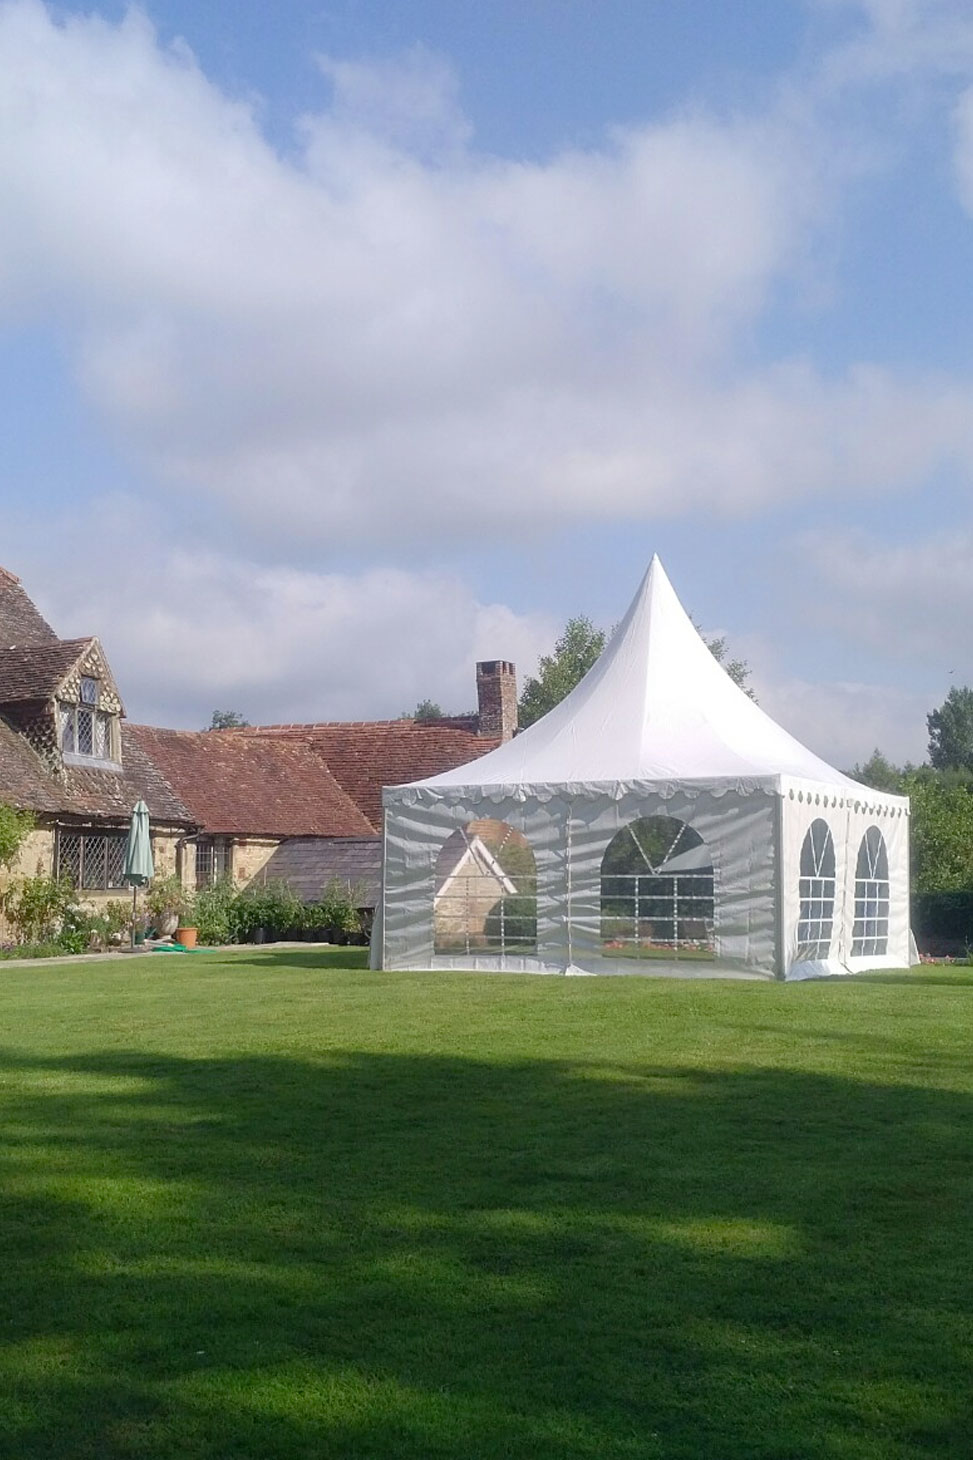 Single pagoda marquee for a lunch party